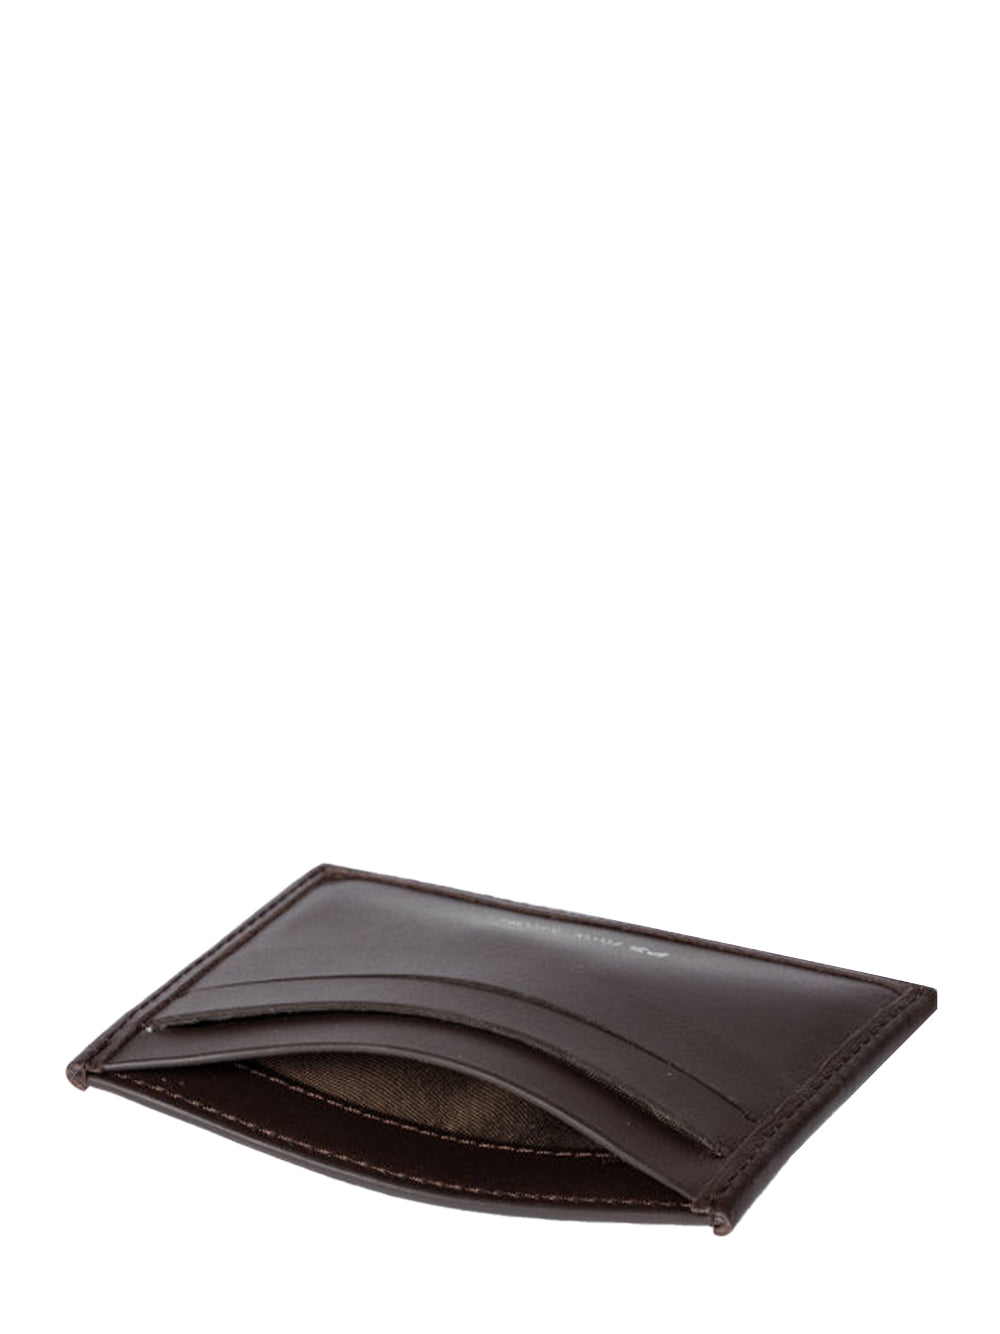 PS Paul Smith Camouflage-Print Leather Cardholder (Multi)